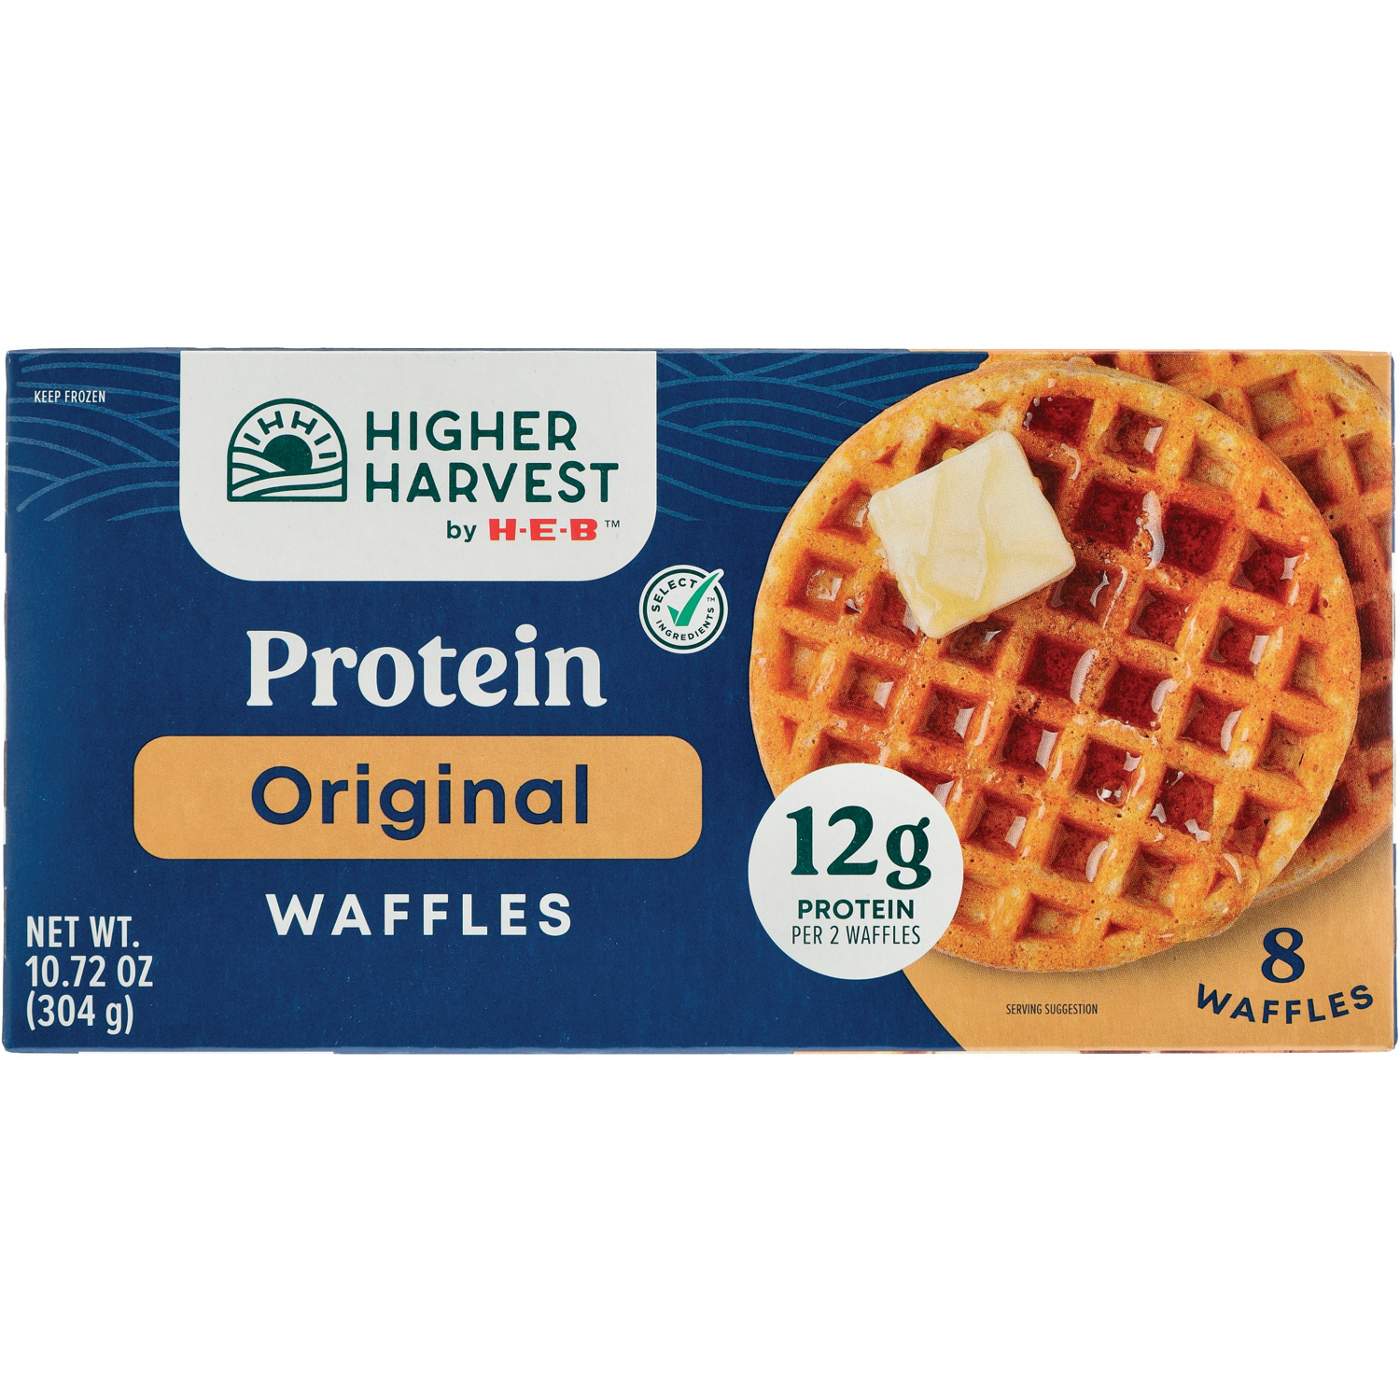 Higher Harvest by H-E-B 12g Protein Frozen Waffles – Original; image 1 of 2